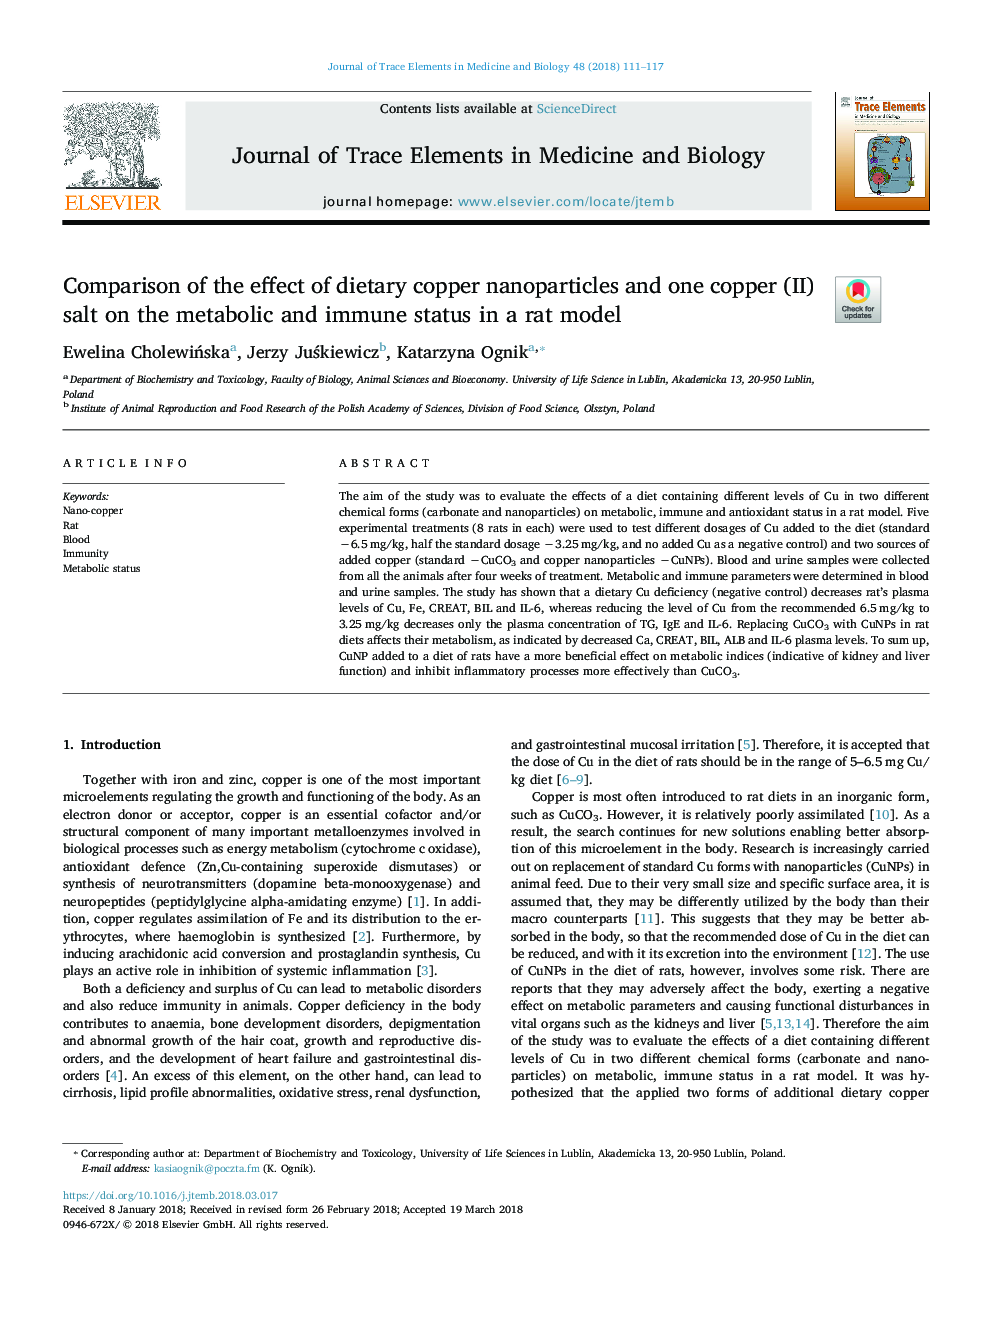 Comparison of the effect of dietary copper nanoparticles and one copper (II) salt on the metabolic and immune status in a rat model